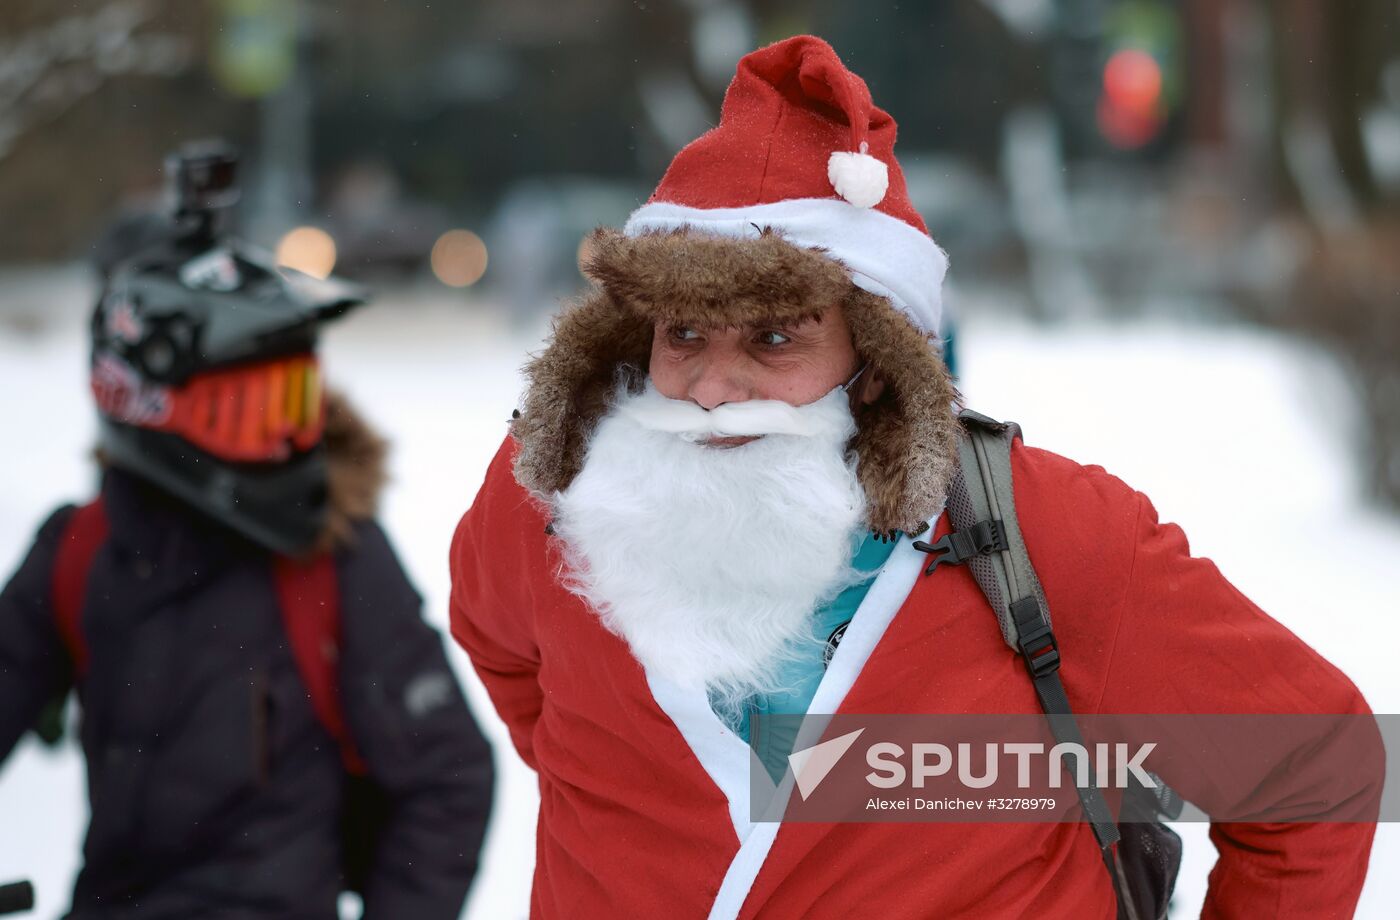 Grandfather Frost bike parade in St. Petersburg